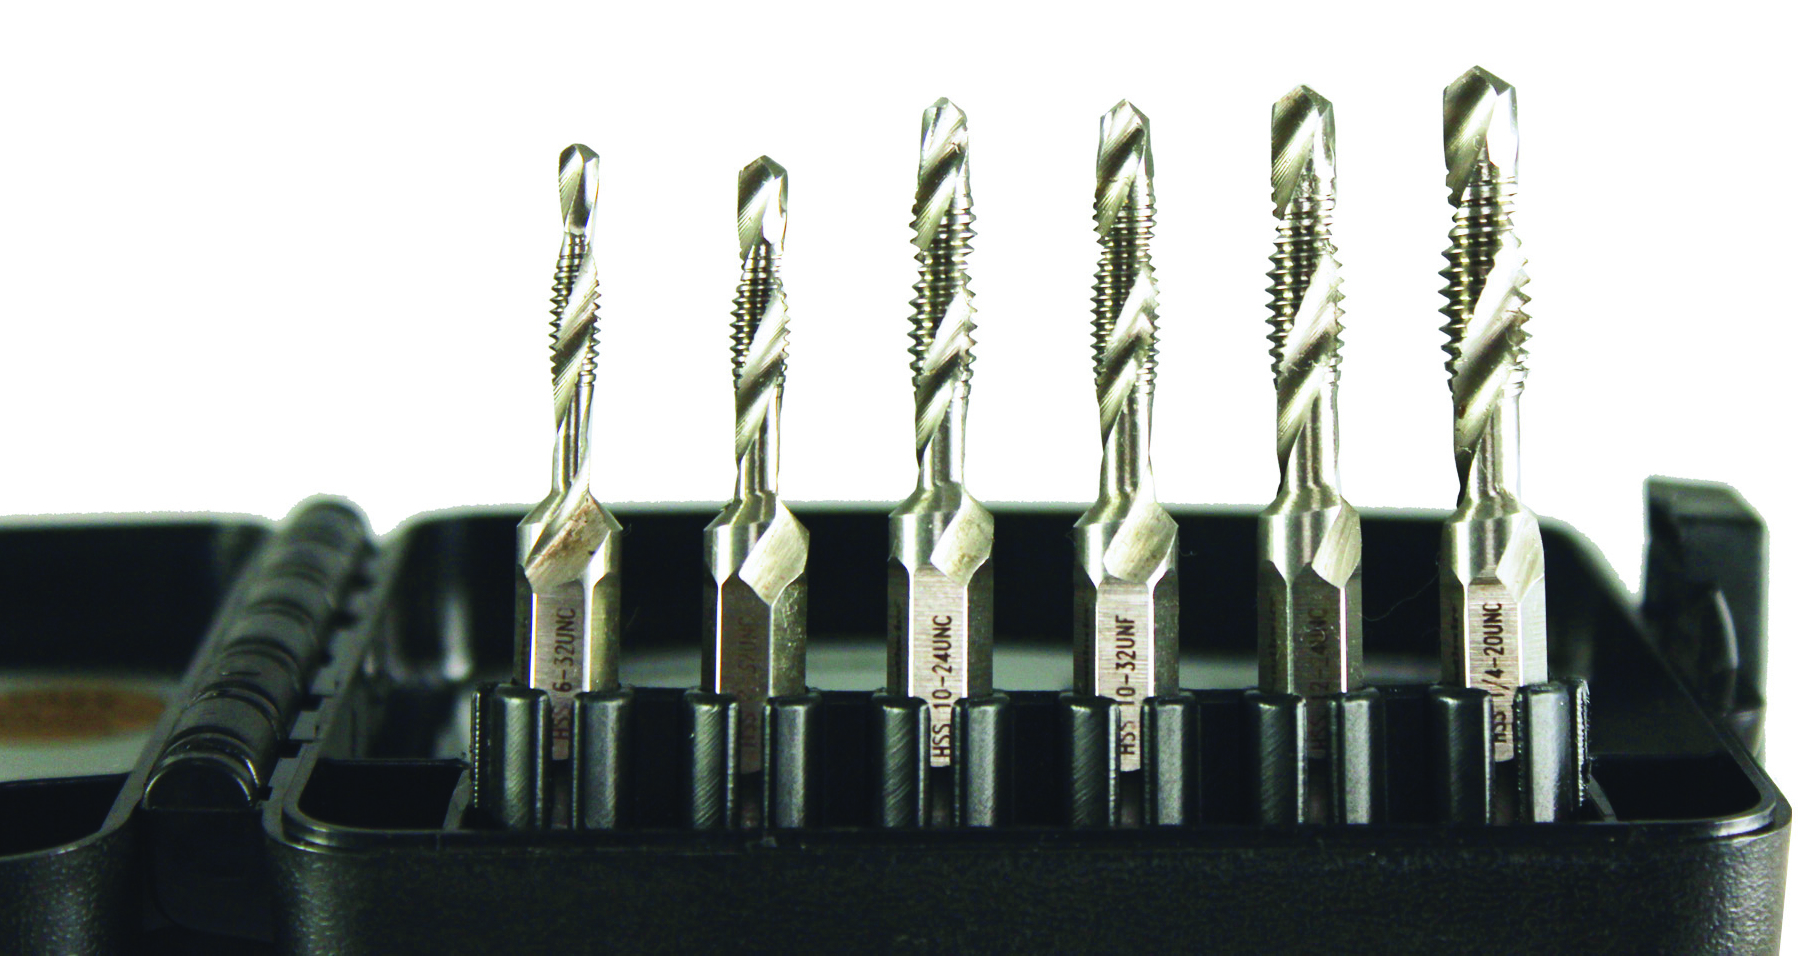 Combination drill and tap bit set, featuring one-piece design bits that drill, tap, and deburr in one operation.